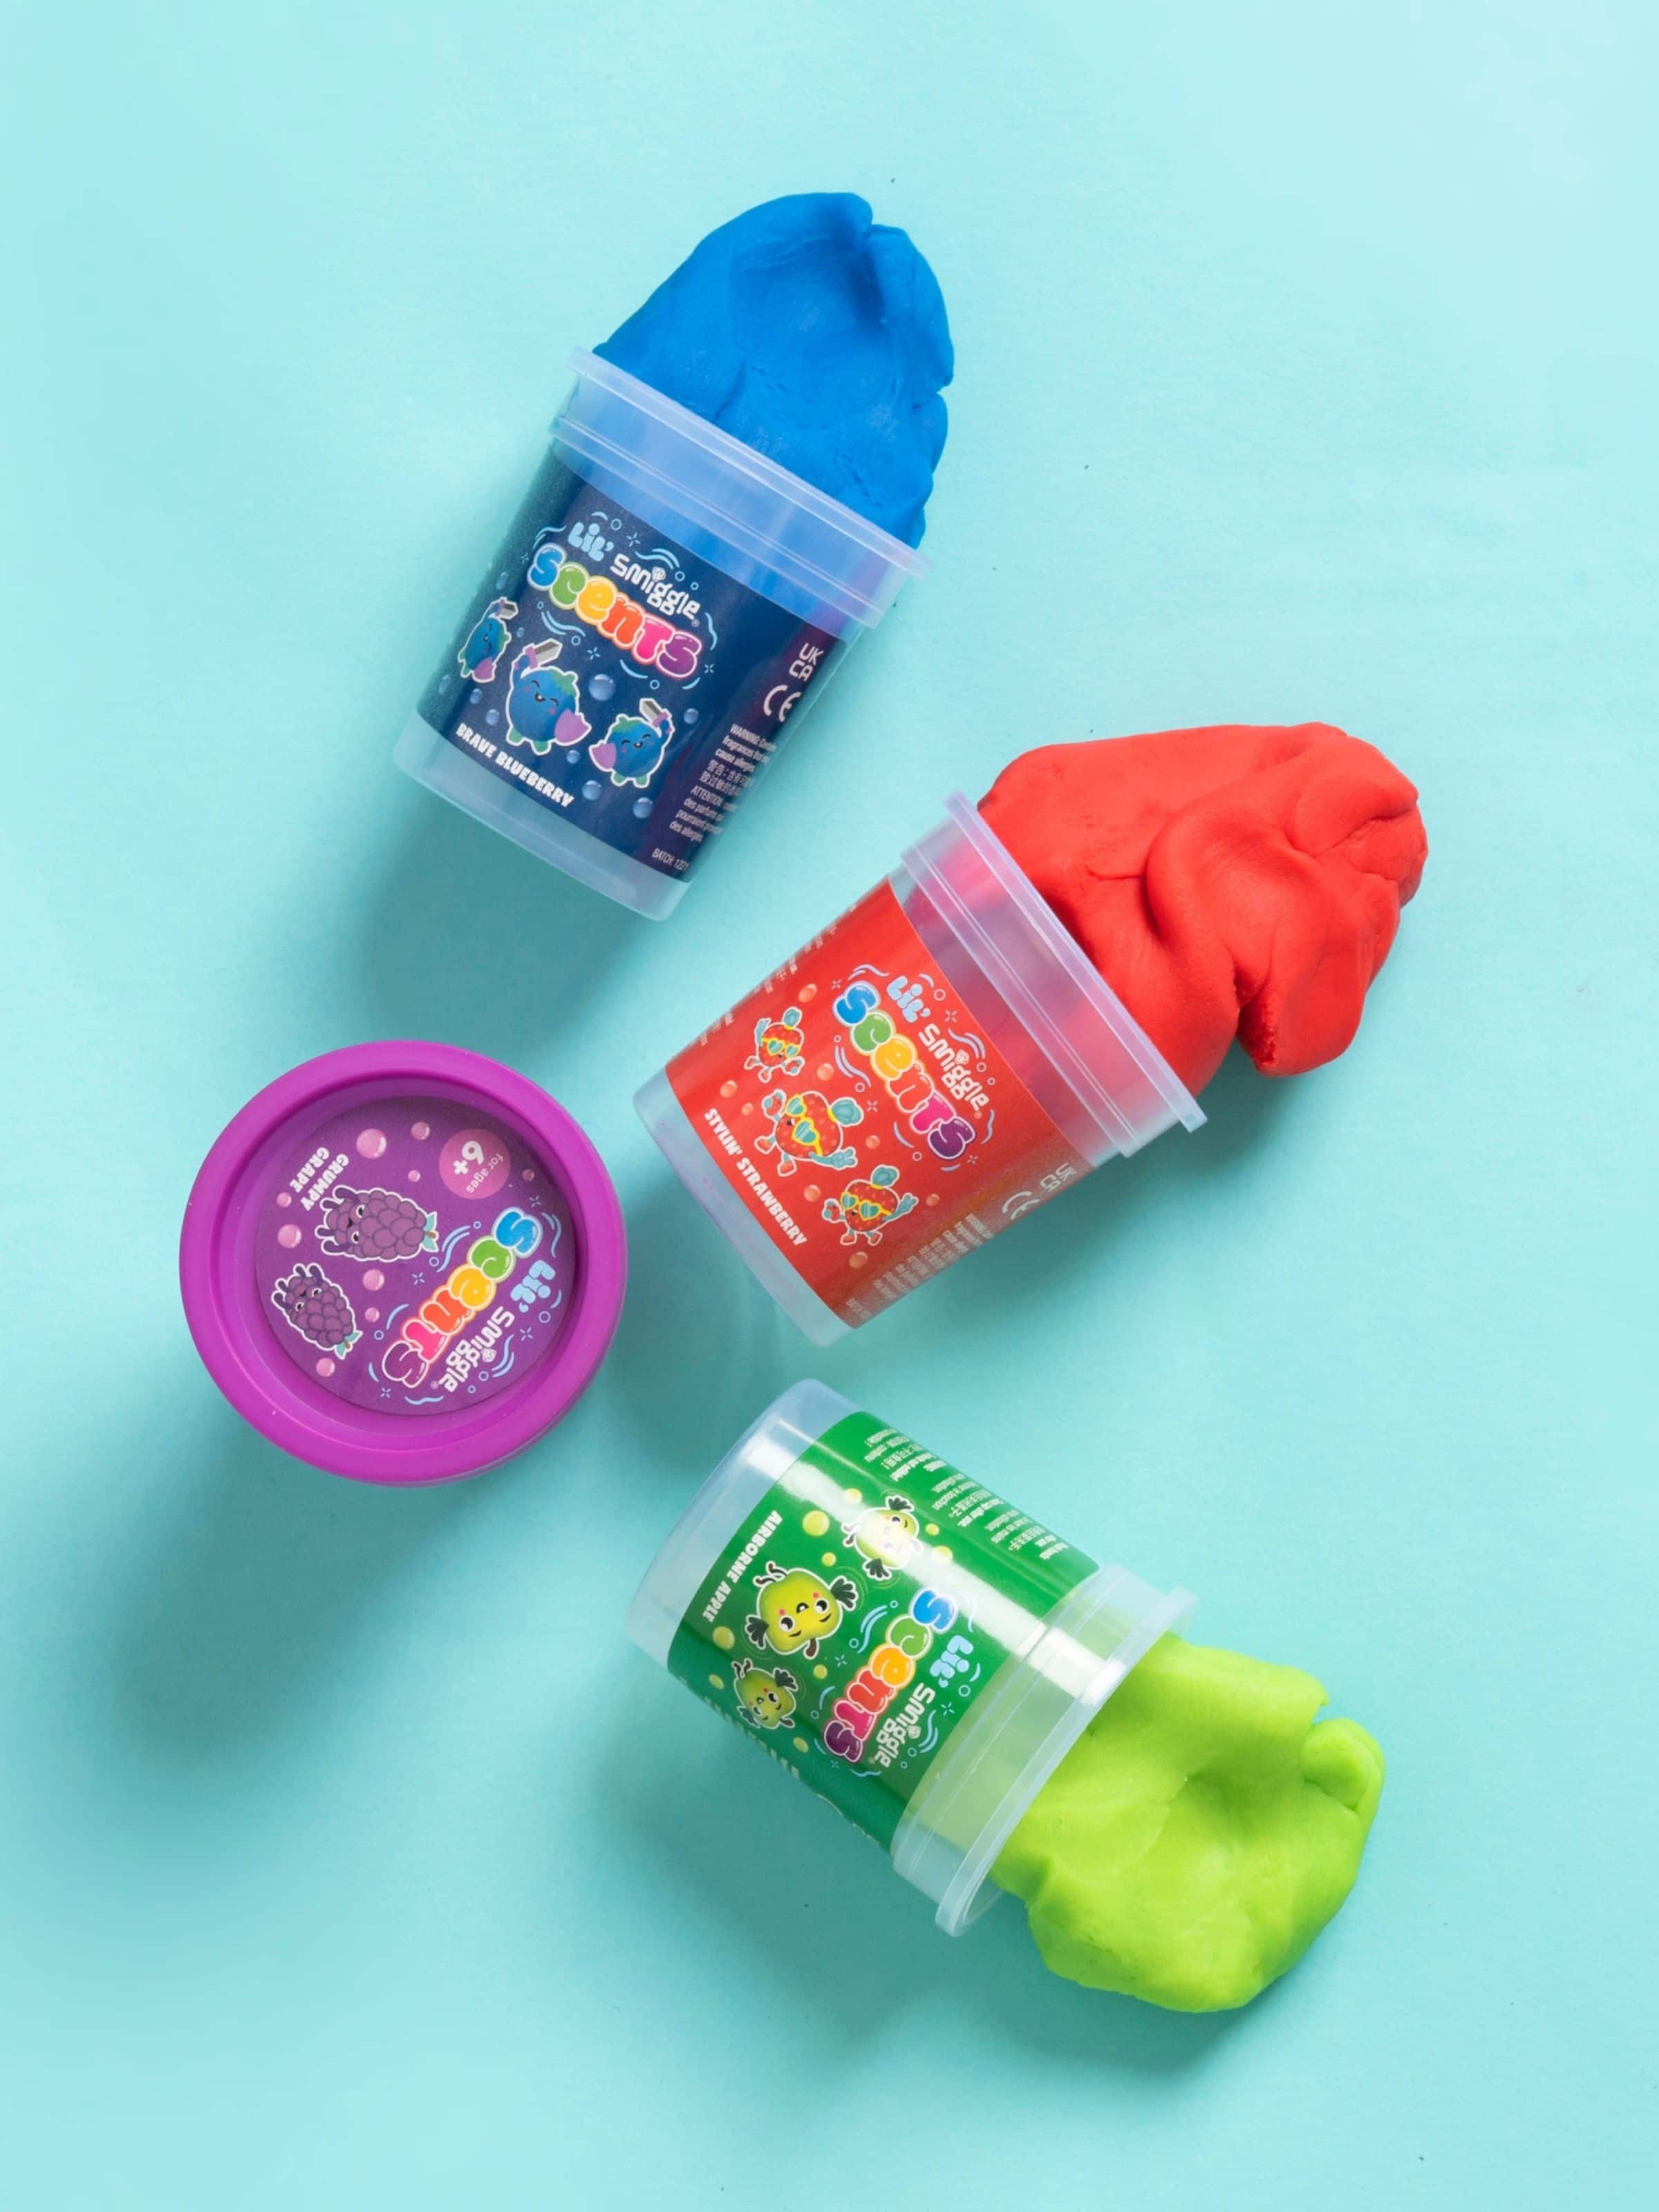 Slime scents